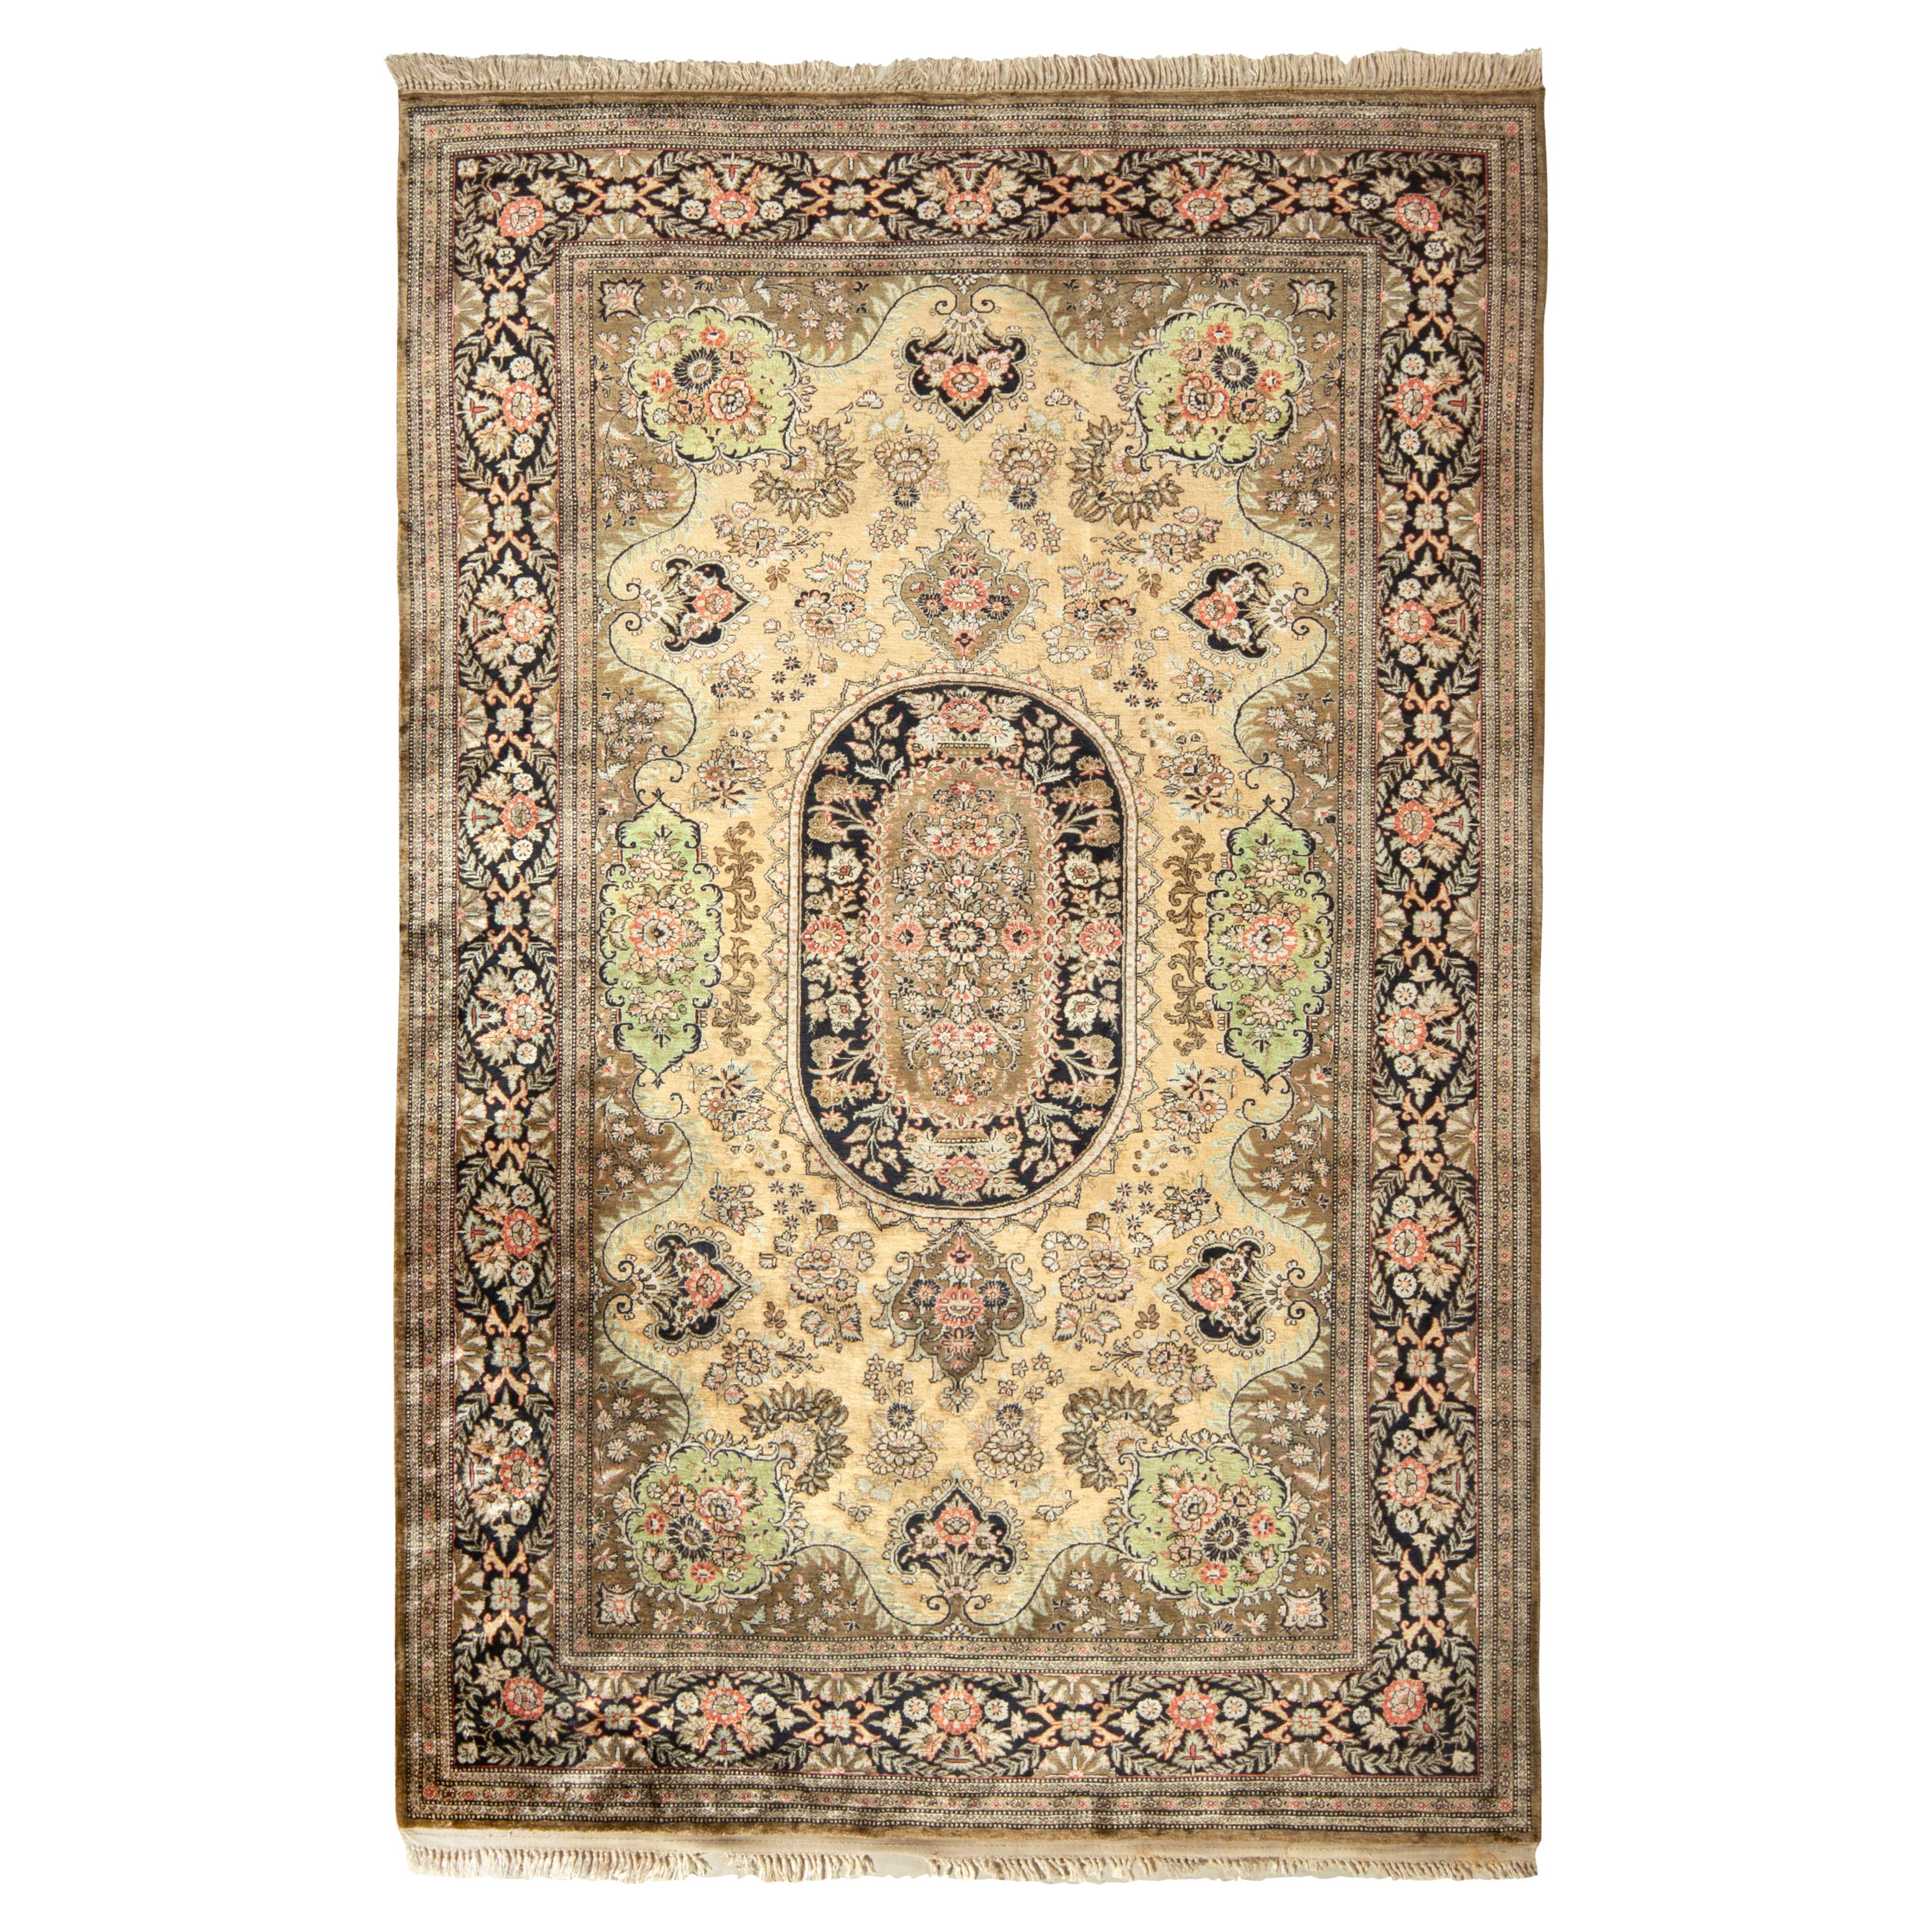 Antique Kerman Rug in an All over Brown, Beige Medallion Pattern by Rug & Kilim For Sale